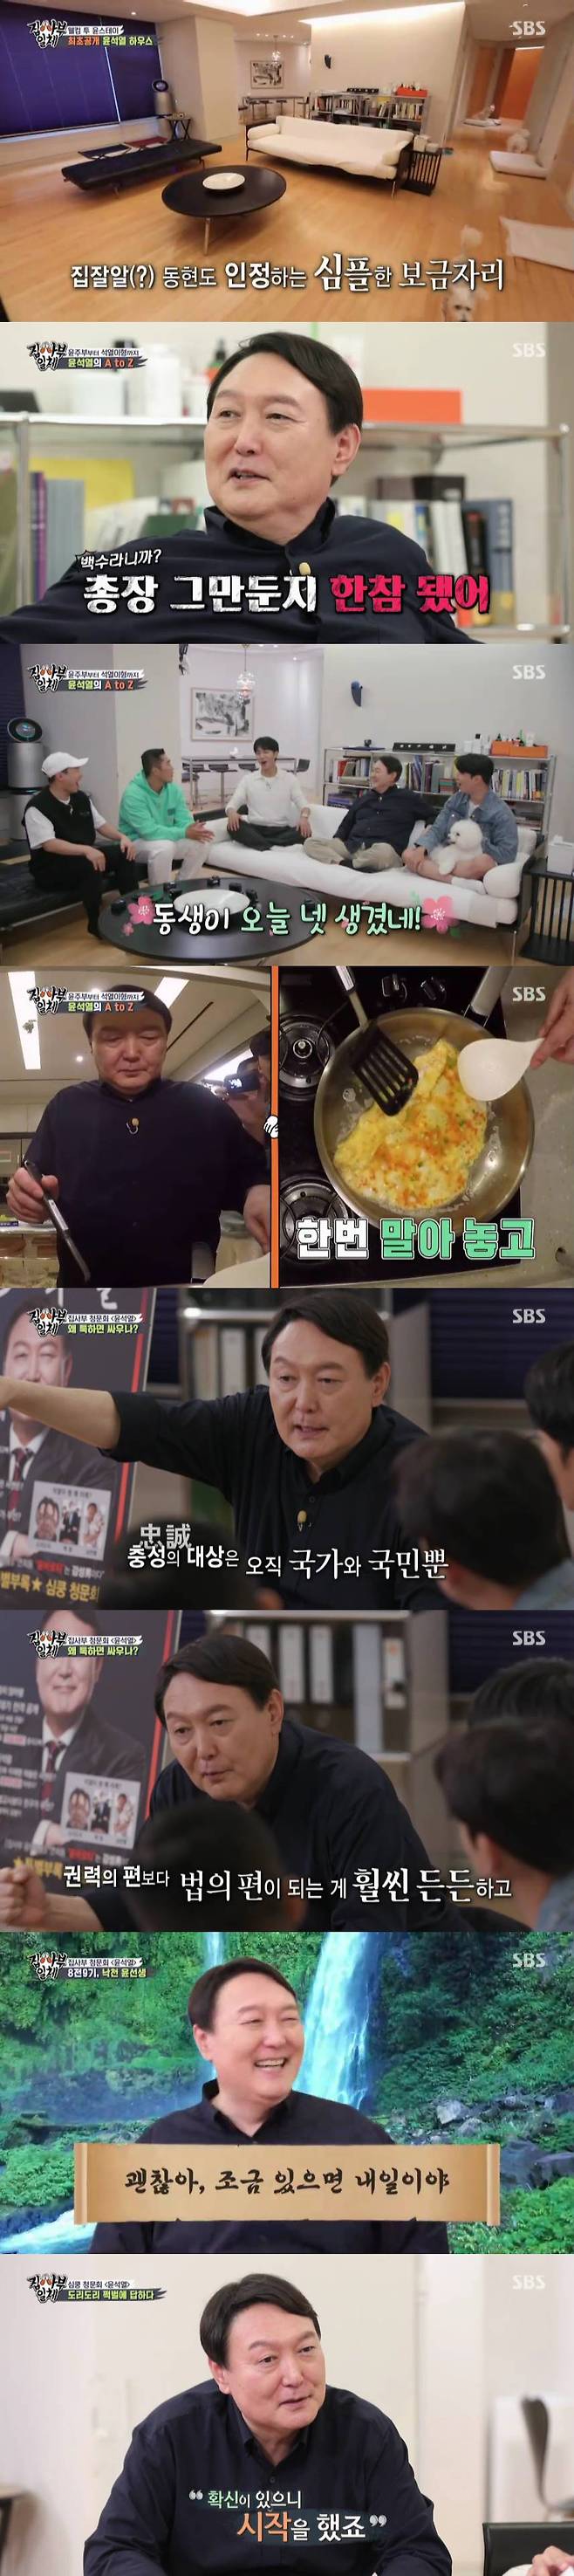 SBS All The Butlers, which was featured in the presidential election, exceeded the double digits of the highest TV viewer ratings per minute.According to Nielsen Korea, a TV viewer rating research company, SBS All The Butlers TV viewer ratings in the metropolitan area rose 3.9% p to 7.8% on the 19th.Top-line and competitive indicators, 2049 target TV viewer ratings, hit 2.2%, while top-rated TV viewer ratings per minute soared to 12.1%.The broadcast was featured in the presidential election.The news that three of the most supportive presidential candidates who declared their candidacy for the 20th presidential election was known to appear, and the first runner on the day, former prosecutor general Yoon Seok-ryul appeared.On this day, Yoon Seok-ryul welcomed the members with comfortable clothes at his house, and his house was revealed for the first time.Yoon Seok-ryul said, I asked you to come to do something delicious. He made kimchi stew, bulgogi, and egg rolls skillfully.Also, to the members who have difficulty in naming, Seo Yeol is called brother. I am now a white man.It has been a long time since I quit Prosector General of South Korea. Or Actor Ju Hyuns vocalization was also friendly and friendly.When asked about the resignation of Prosector General of South Korea and the presidential candidacy, Yoon Seok-ryul said, It is difficult to decide to run.Its not normal, he said, adding that he decided to run for president after a long period of troubles after his retirement.Our generation could have acquired Apartment for about 10 years, but it was too difficult to get a house for the present, said Yoon Seok-ryul. If a young person does not have hope, the society is dead.Im a little afraid when I do something new, he said. Im a little scared when Im doing something new.Im sure I can push it in the direction I thought I would, without giving up, he added.The All The Butlers hearing was held to intensively explore Master Yoon Seok-ryul.First, Yoon Seok-ryul talked about his representative quote, Im not loyal to people. He told his juniors, The prosecutor should not be loyal to people.I am saying that people are personnel rights, and that the object of loyalty is only the nation and the people, and even if you can like people, you are not loyal.Yoon Seok-ryul said, The chicken is important, but it is with the president. The members said, We handled the case that we took over according to the law.There is no reason to challenge the president, he said. It is much more secure to be on the side of the law than to the side of power.If the law of the powerful is not properly handled, the people can not be told to keep the law, and society is in turmoil. It is important how much the investigation into the powerful is based on principle.It should be based on the principle unconditionally. When asked if there was anything he wanted to take away from Lee Jae-myung and Lee Nak-yeon, who foreshadowed the presidential feature, Yoon Seok-ryul said, I want to be meticulous to Lee Nak-yeon and I want to resemble Lee Jae-myung.Yoon Seok-ryul replied, Yes, to the question I am the 20th president of the Republic of Korea.I have to show you more, but you have seen me doing well so far, so you will have the belief that you will do well. Finally, Yoon Seok-ryul asked, If I become president, I will not do this. Sharing rice together is the basis of communication.I will always communicate with many people, including opposition parties, journalists, and people who need encouragement, he said. I will not eat and eat, he said, I will not hide in front of the people, whether I did well or wrong.Meanwhile, the special feature of All The Butlers presidential candidate will be former prosecutor general Yoon Seok-ryul, Gyeonggi Governor Lee Jae-myung on the 26th, and Lee Nak-yeon, former Democratic Party leader on October 3.